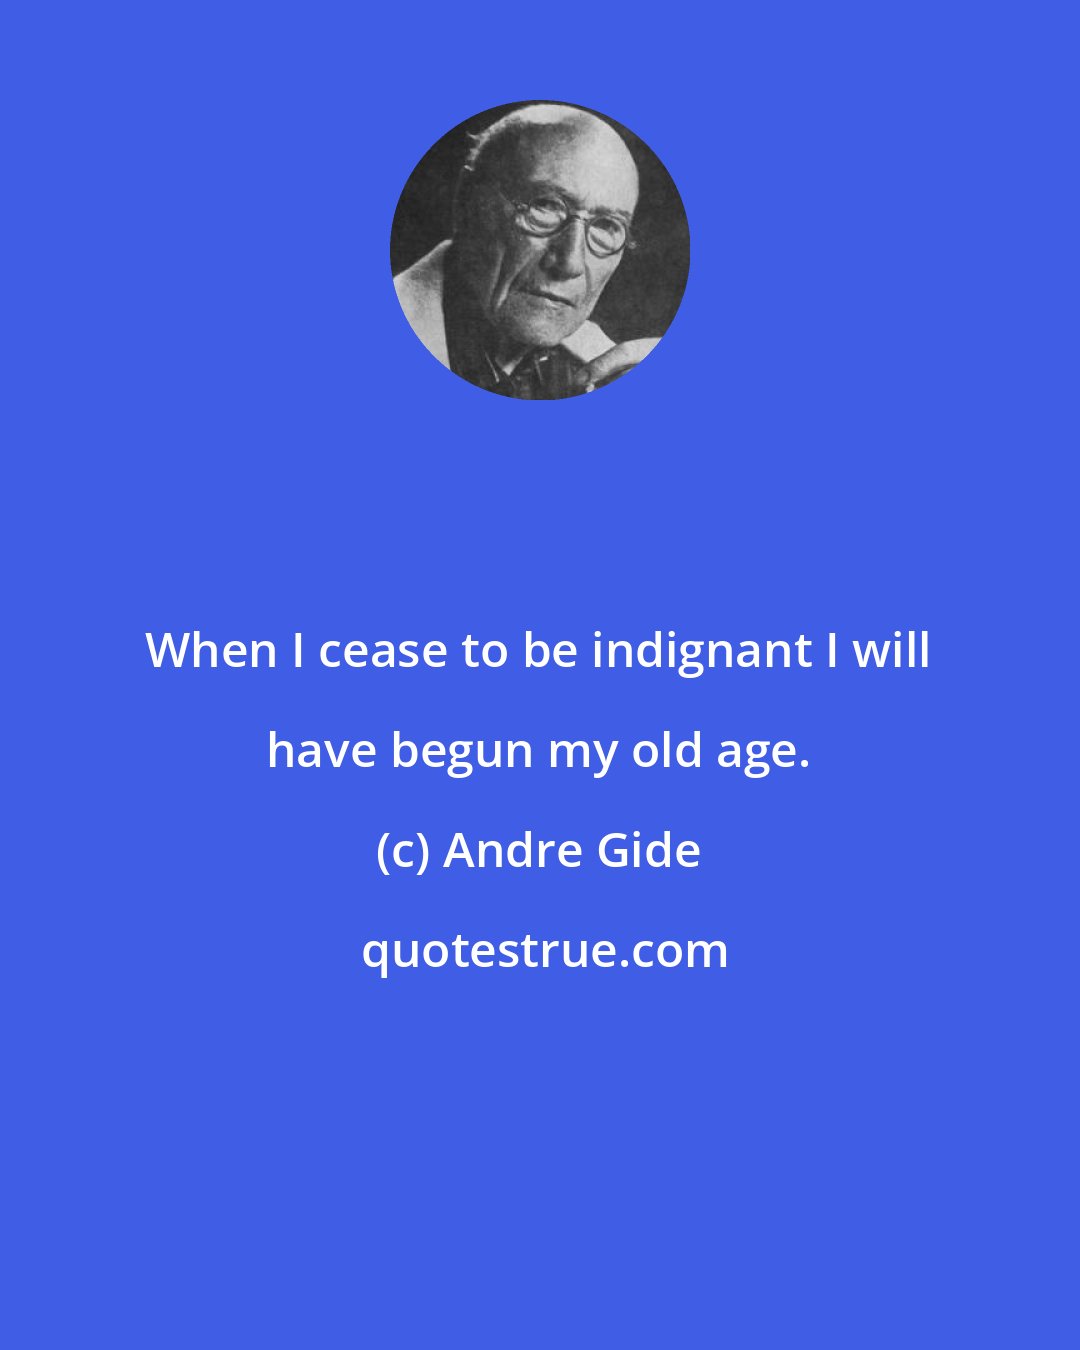 Andre Gide: When I cease to be indignant I will have begun my old age.